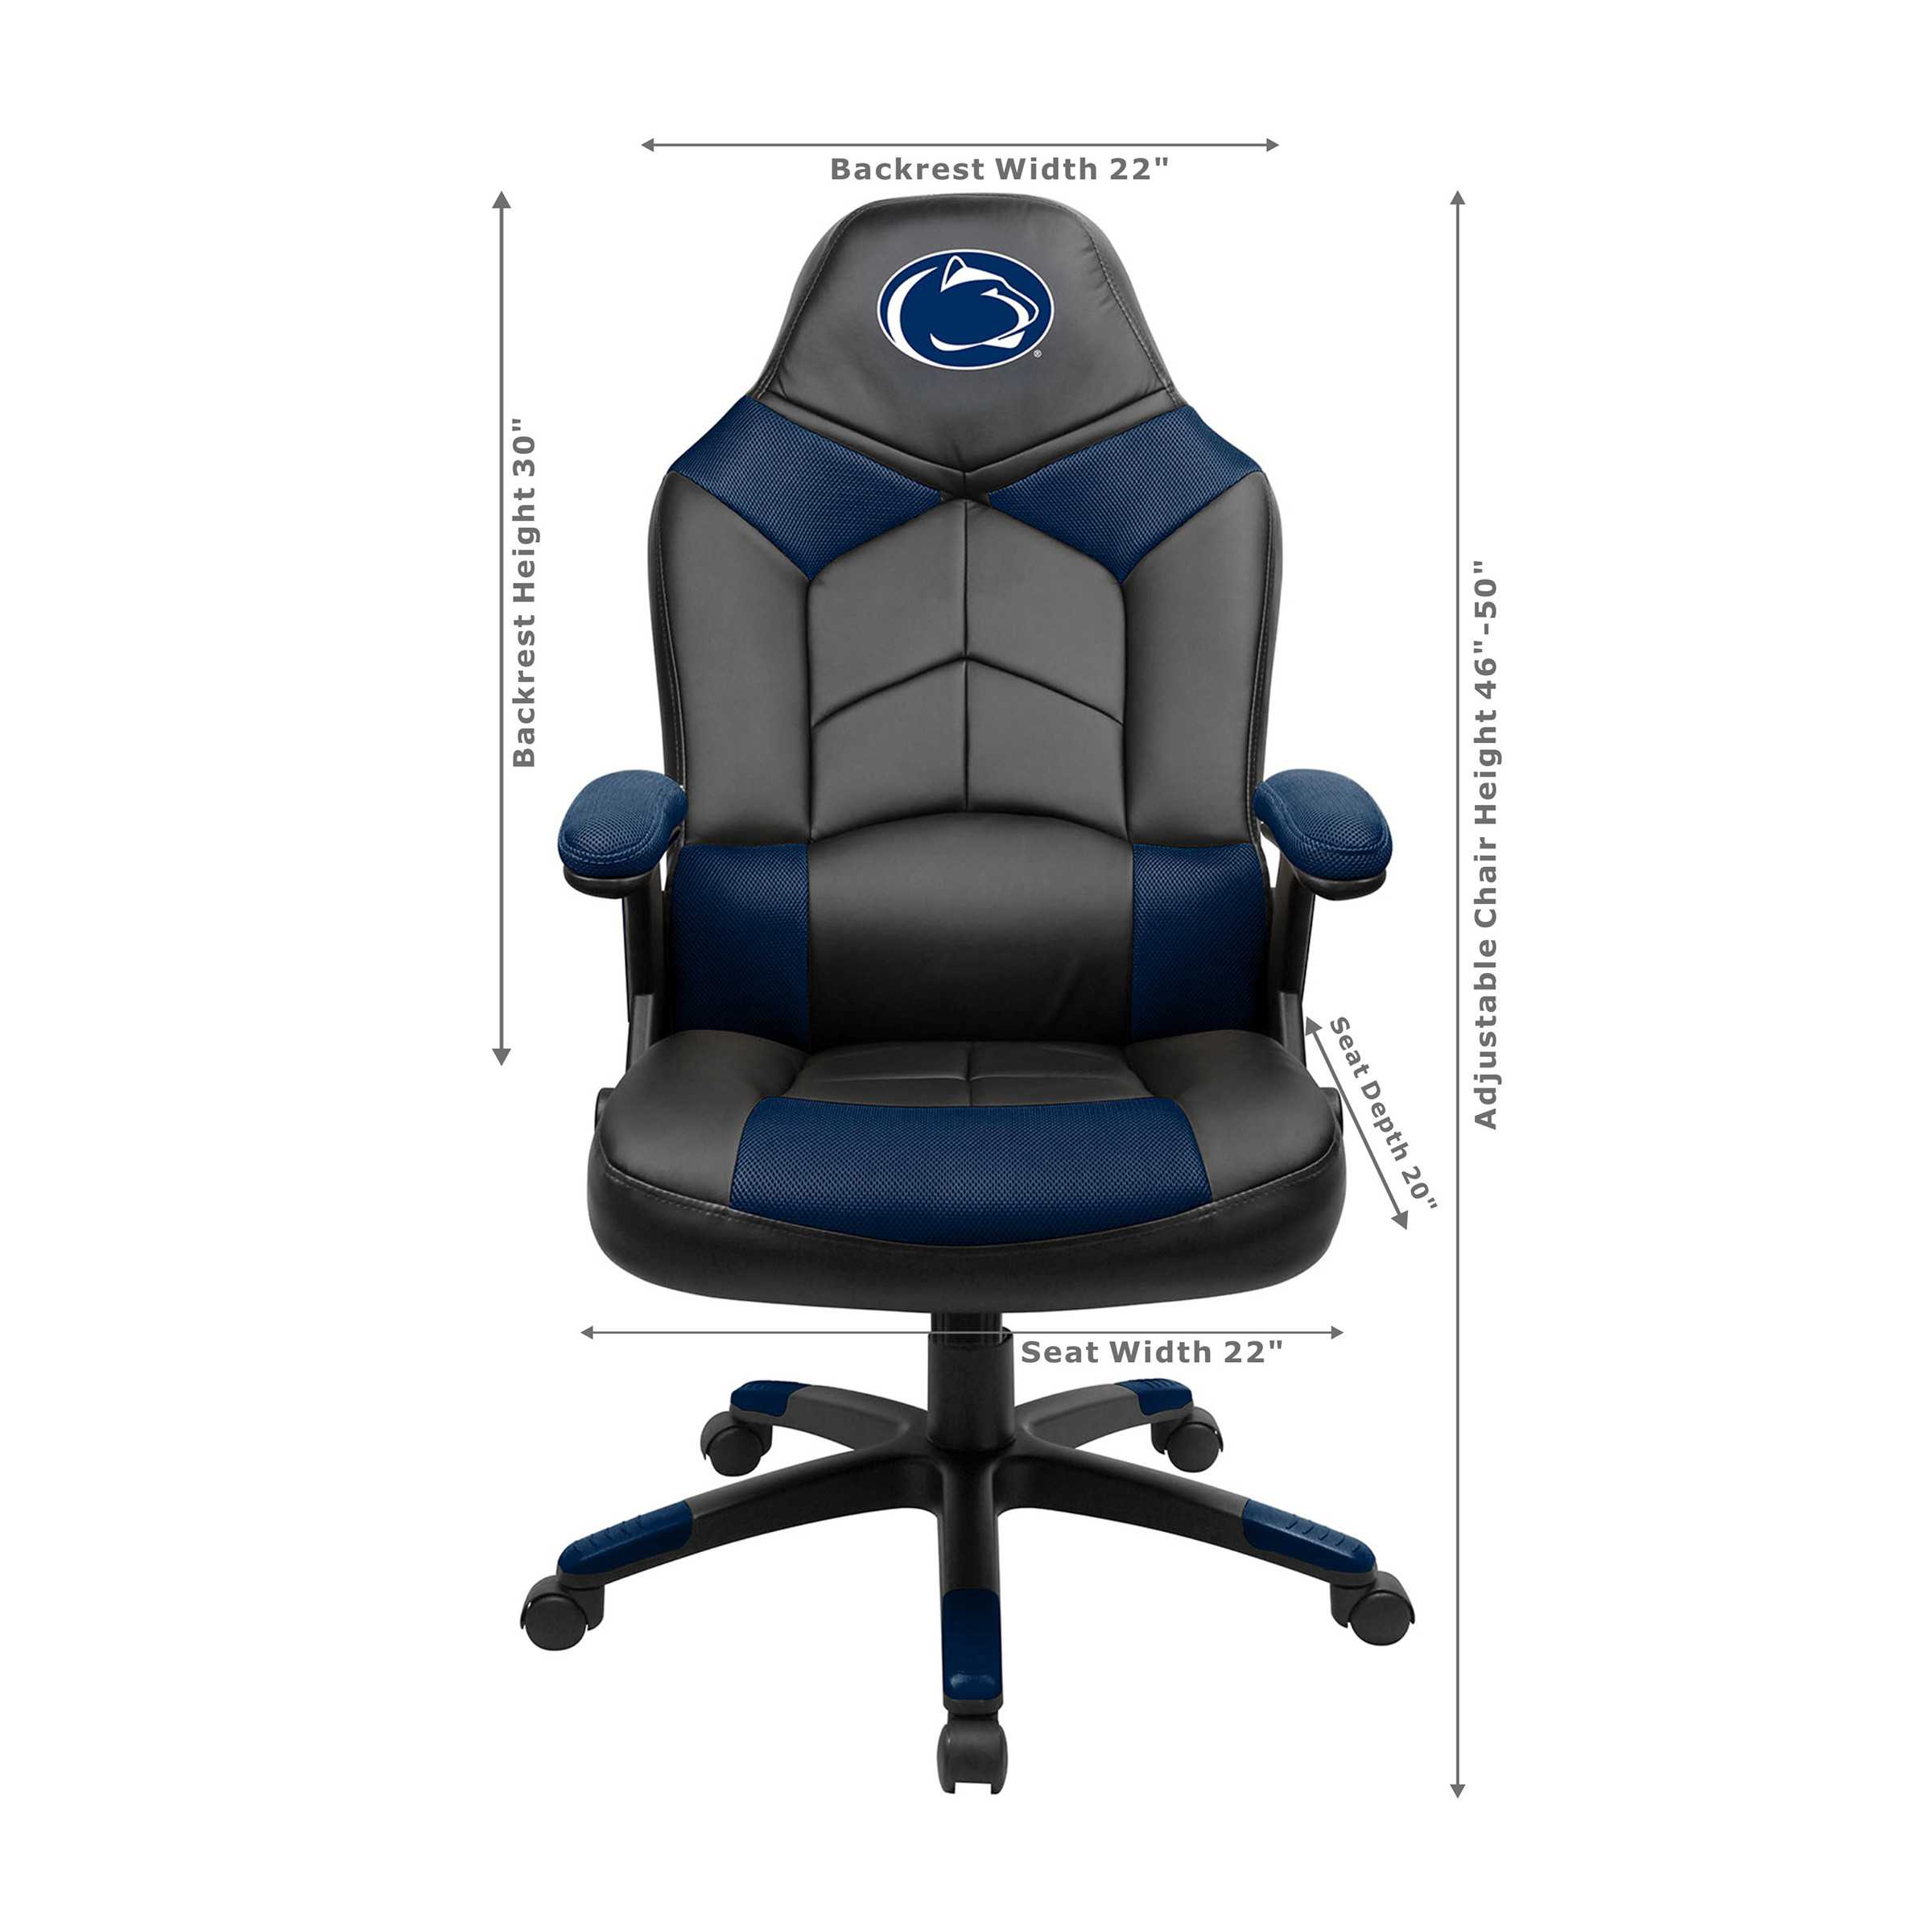 PENN STATE OVERSIZED GAMEING CHAIR